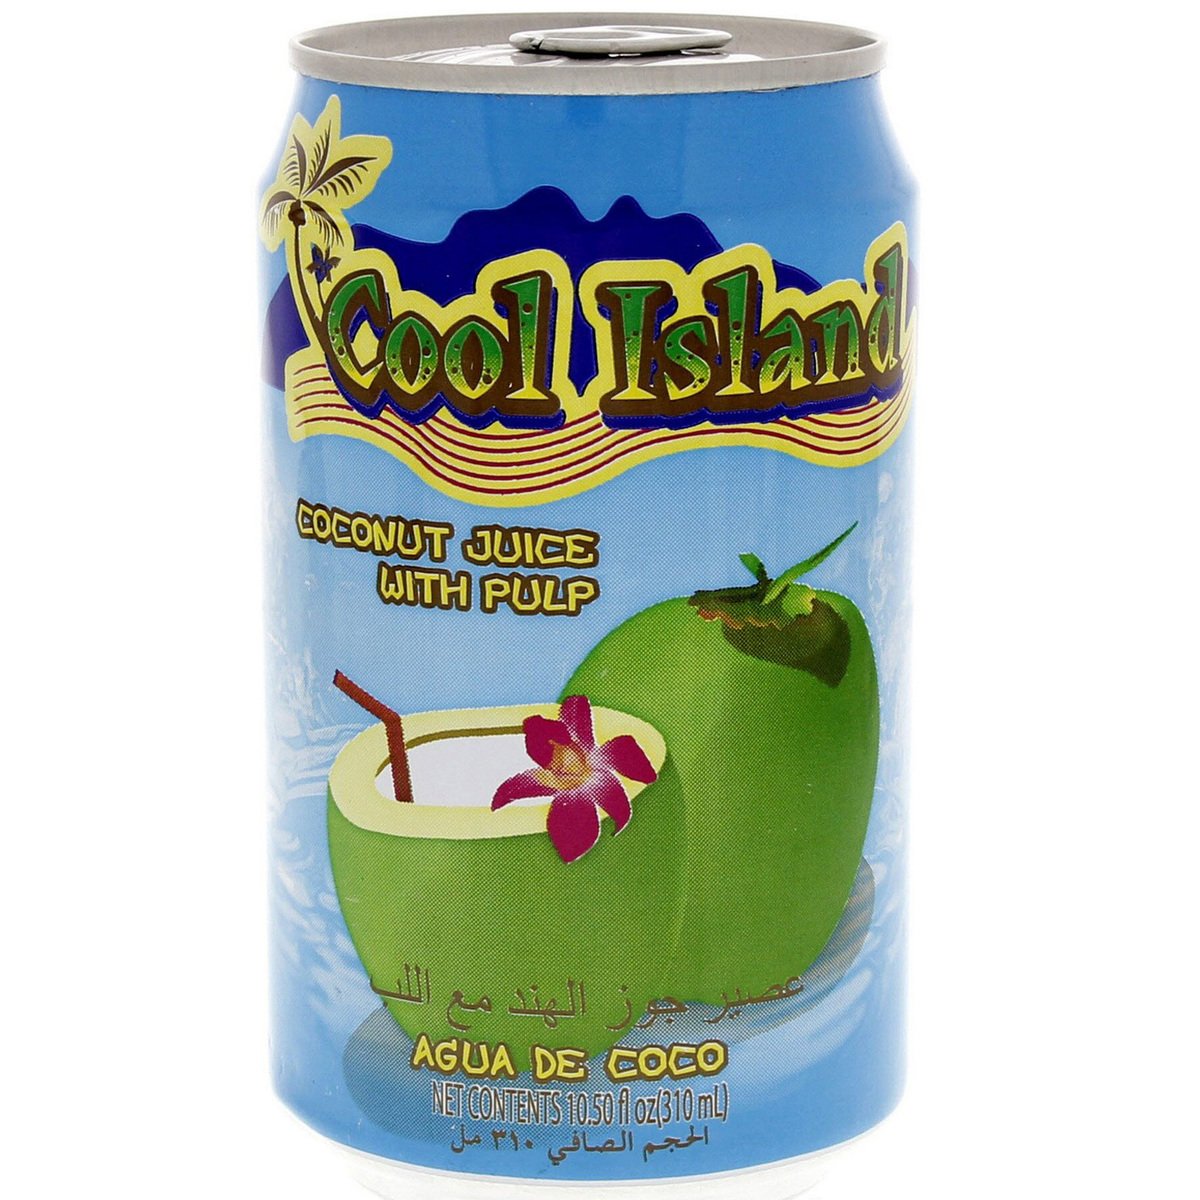 Cool Island Coconut Juice With Pulp 310 ml